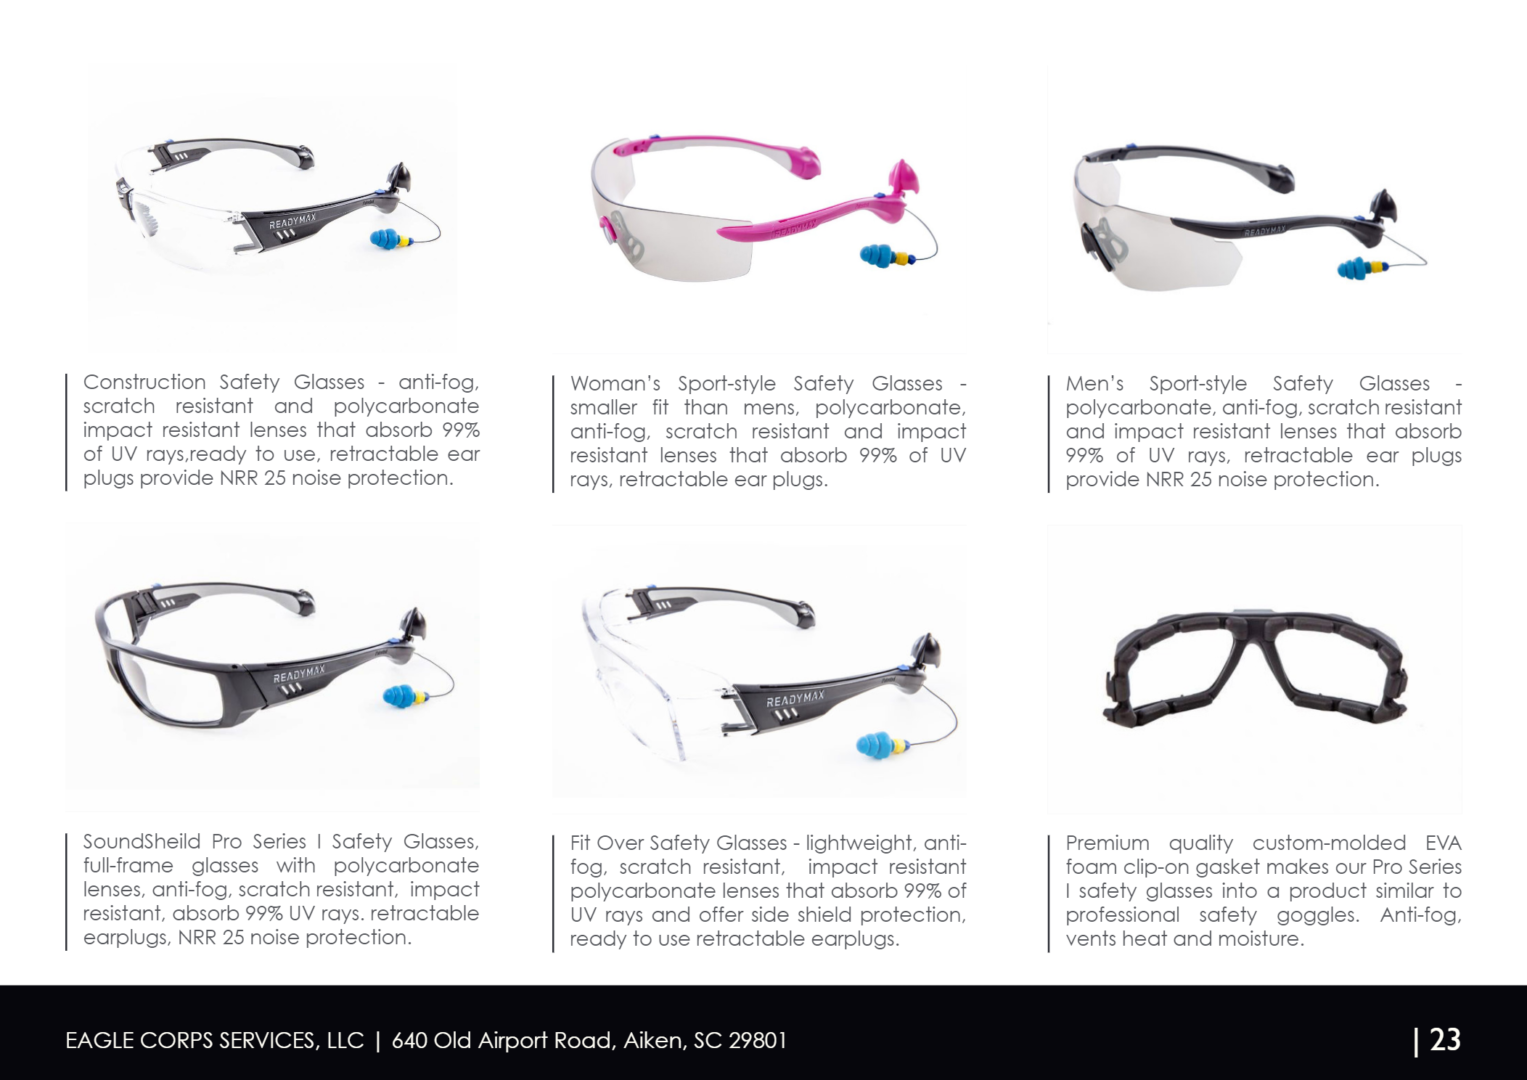 Different styles of safety glasses